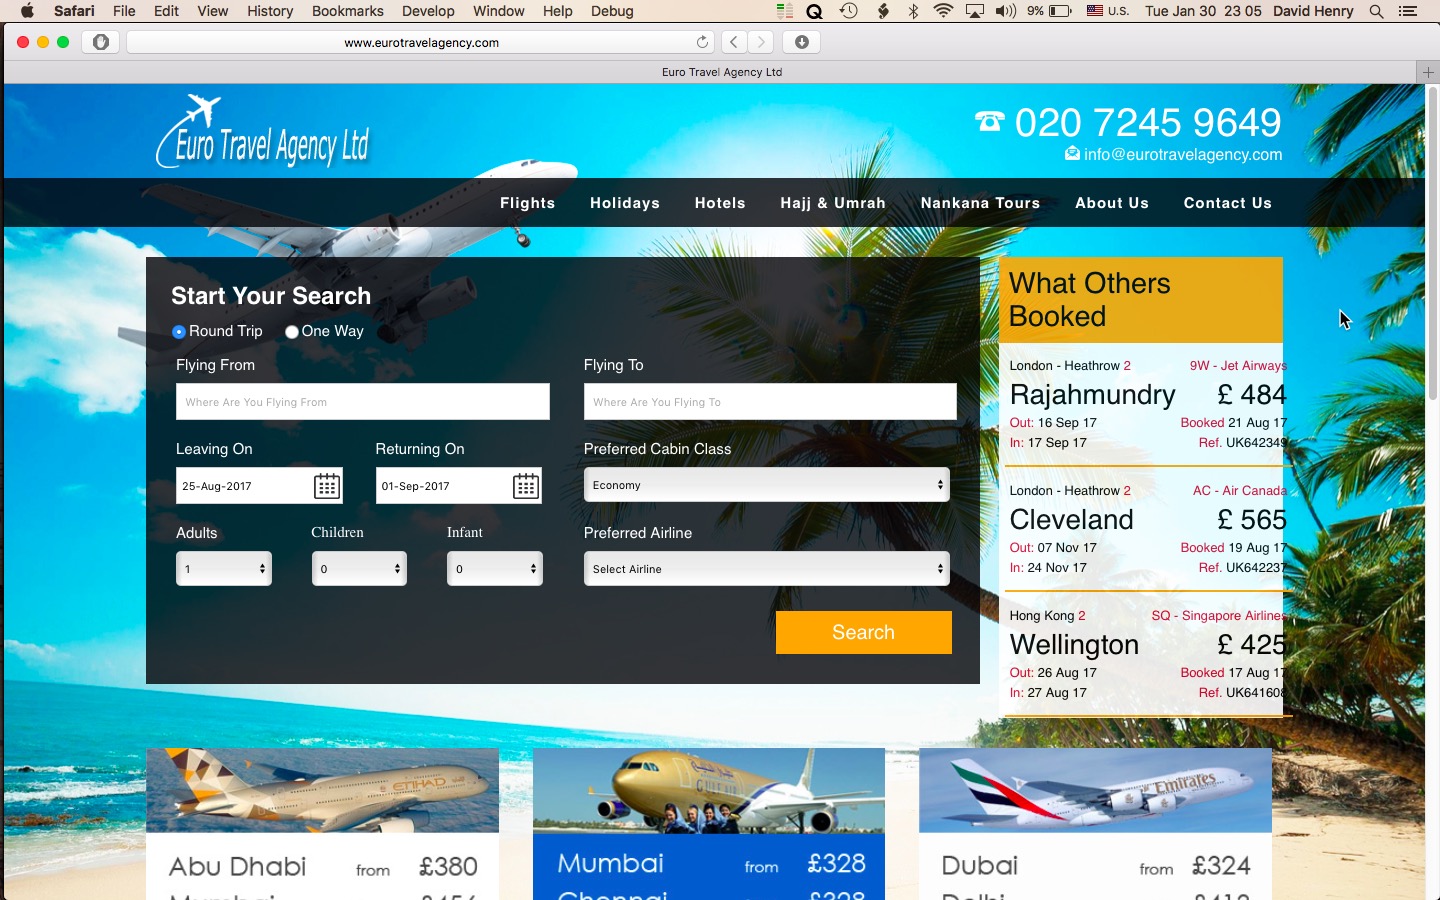 Euro Travel Agency’s home page